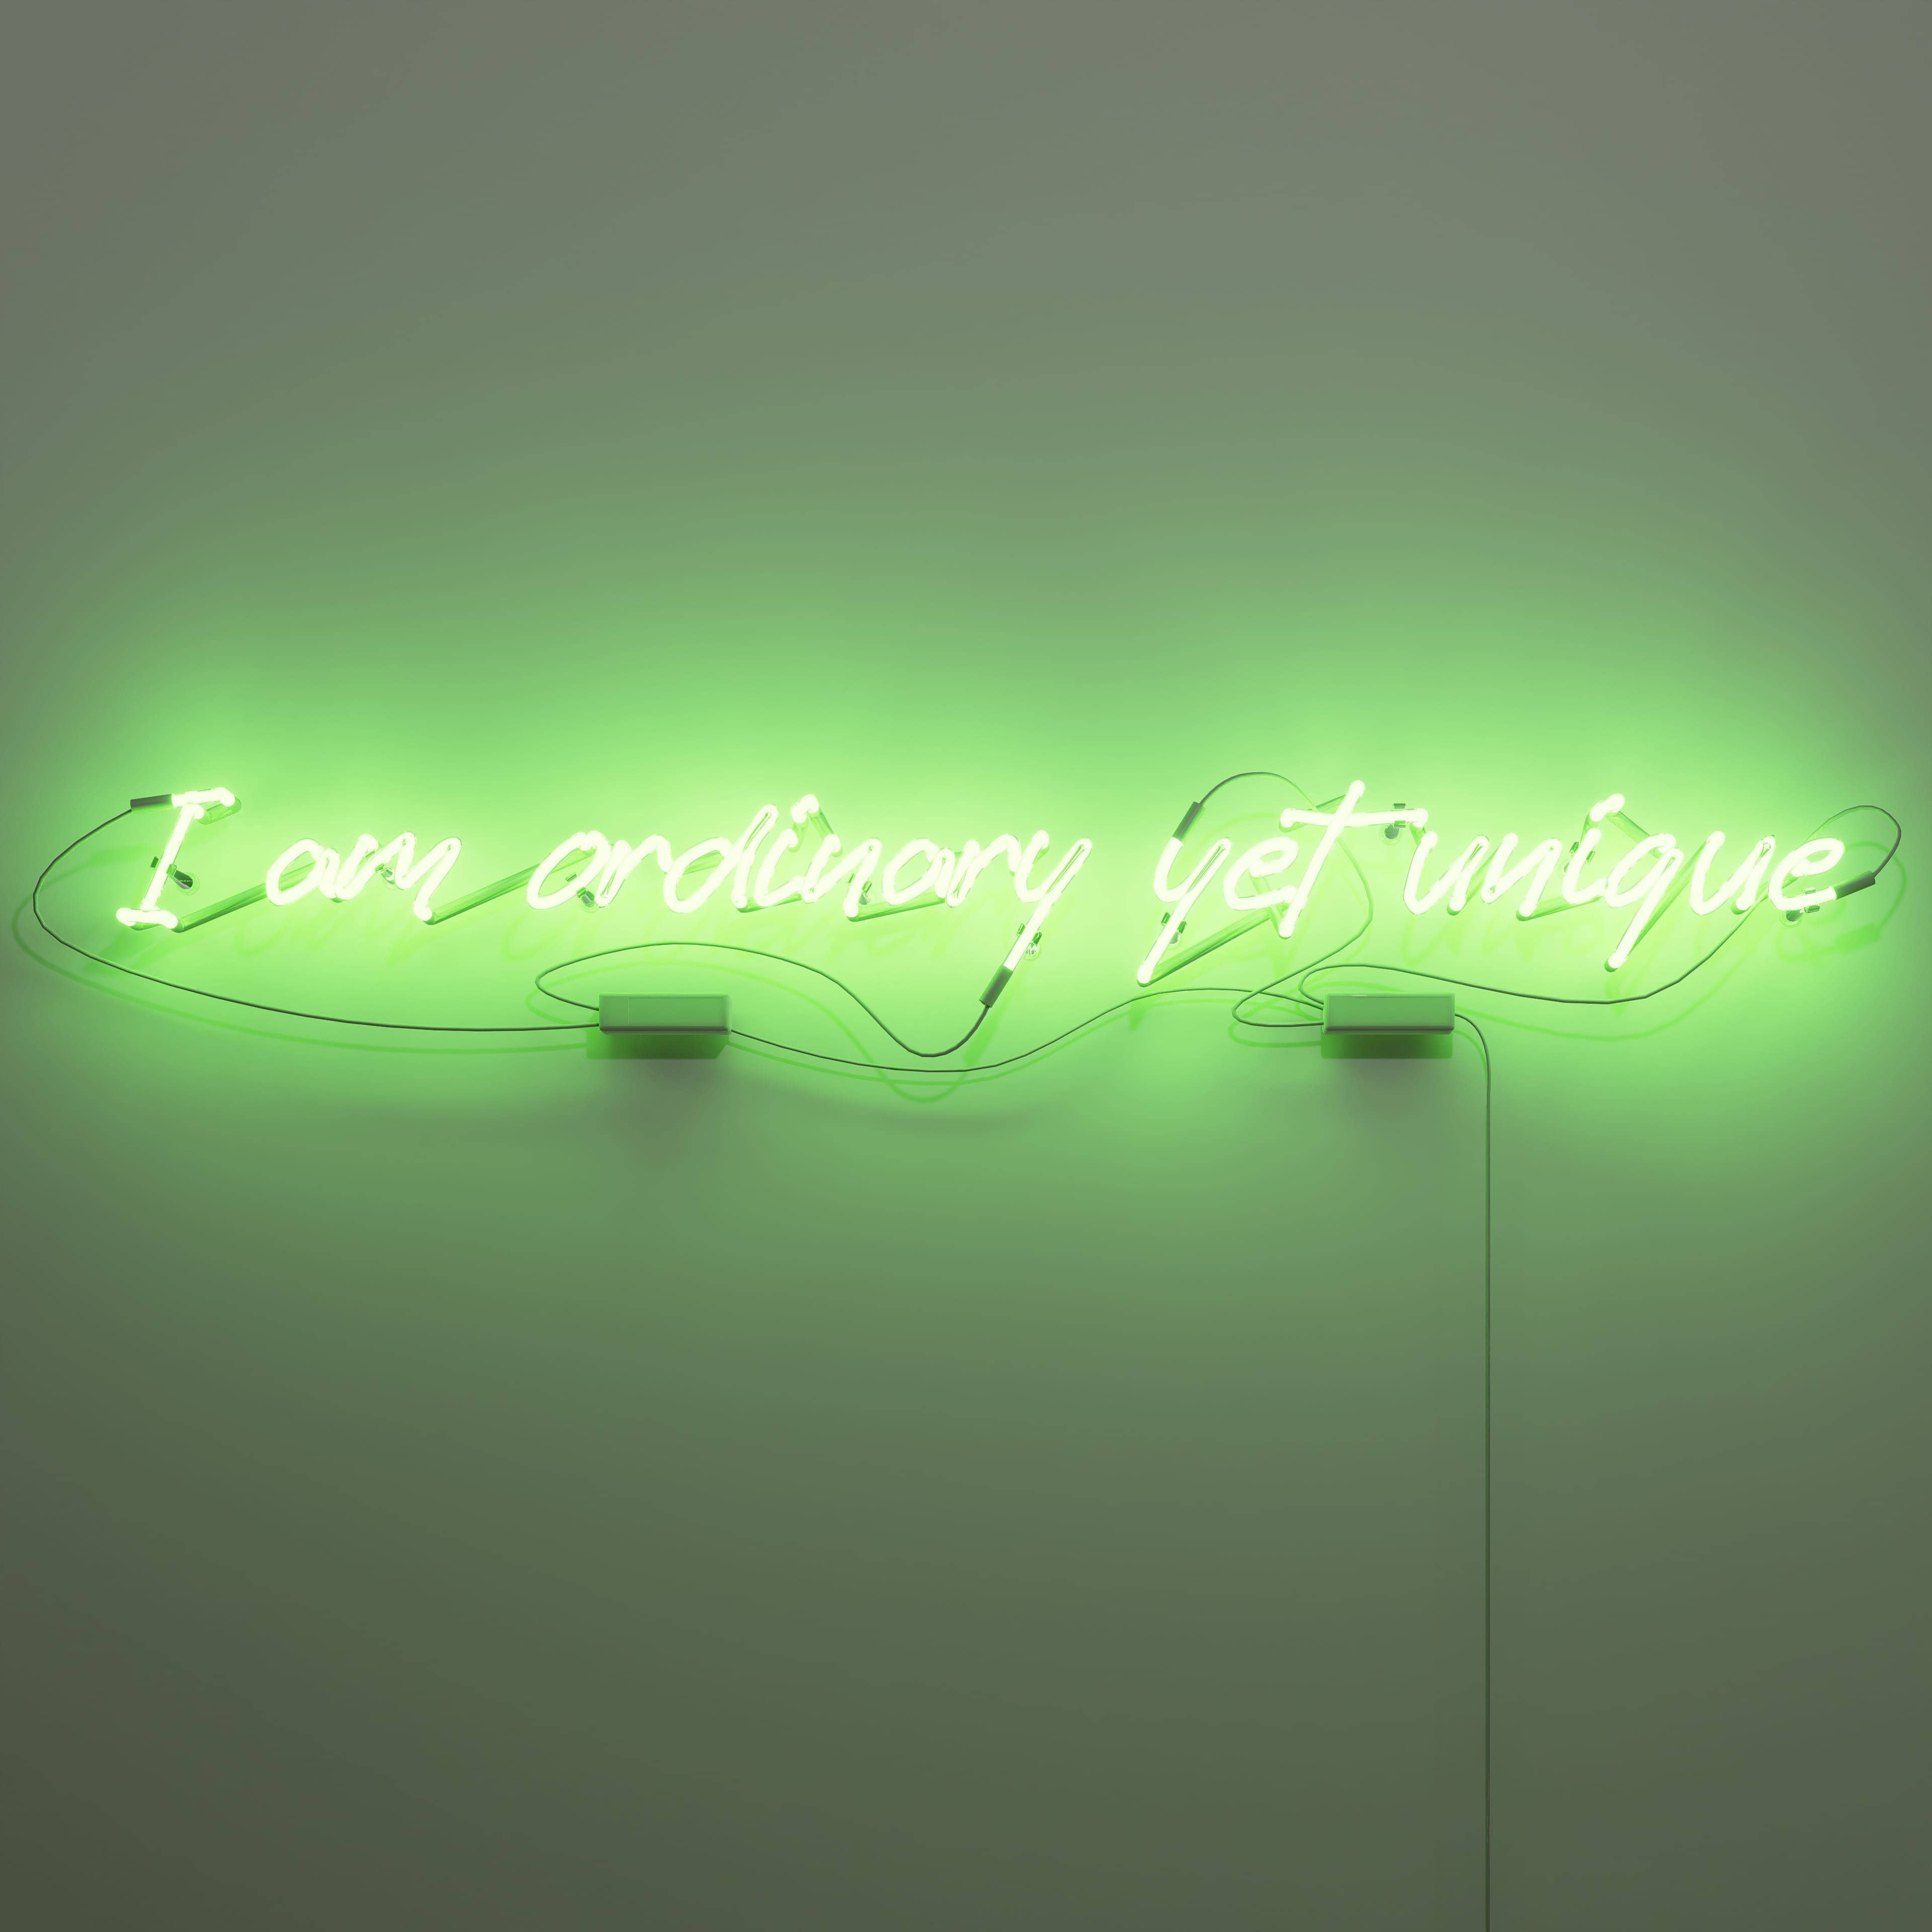 vintage-neon-signs-inspire-remarkable-individuality